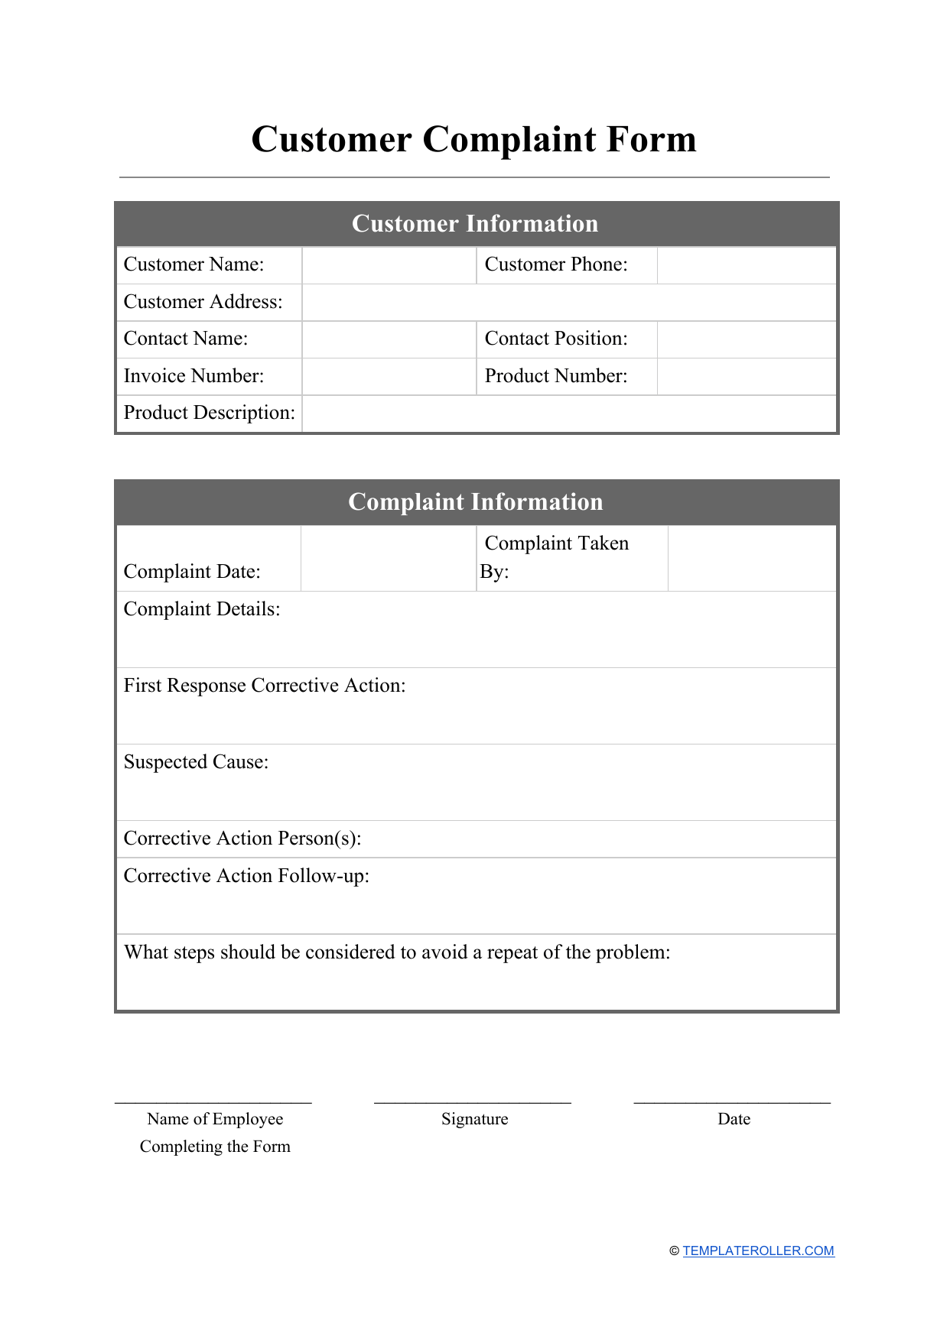 Customer Complaint Form Download Printable PDF  Templateroller Pertaining To Customer Information Card Template